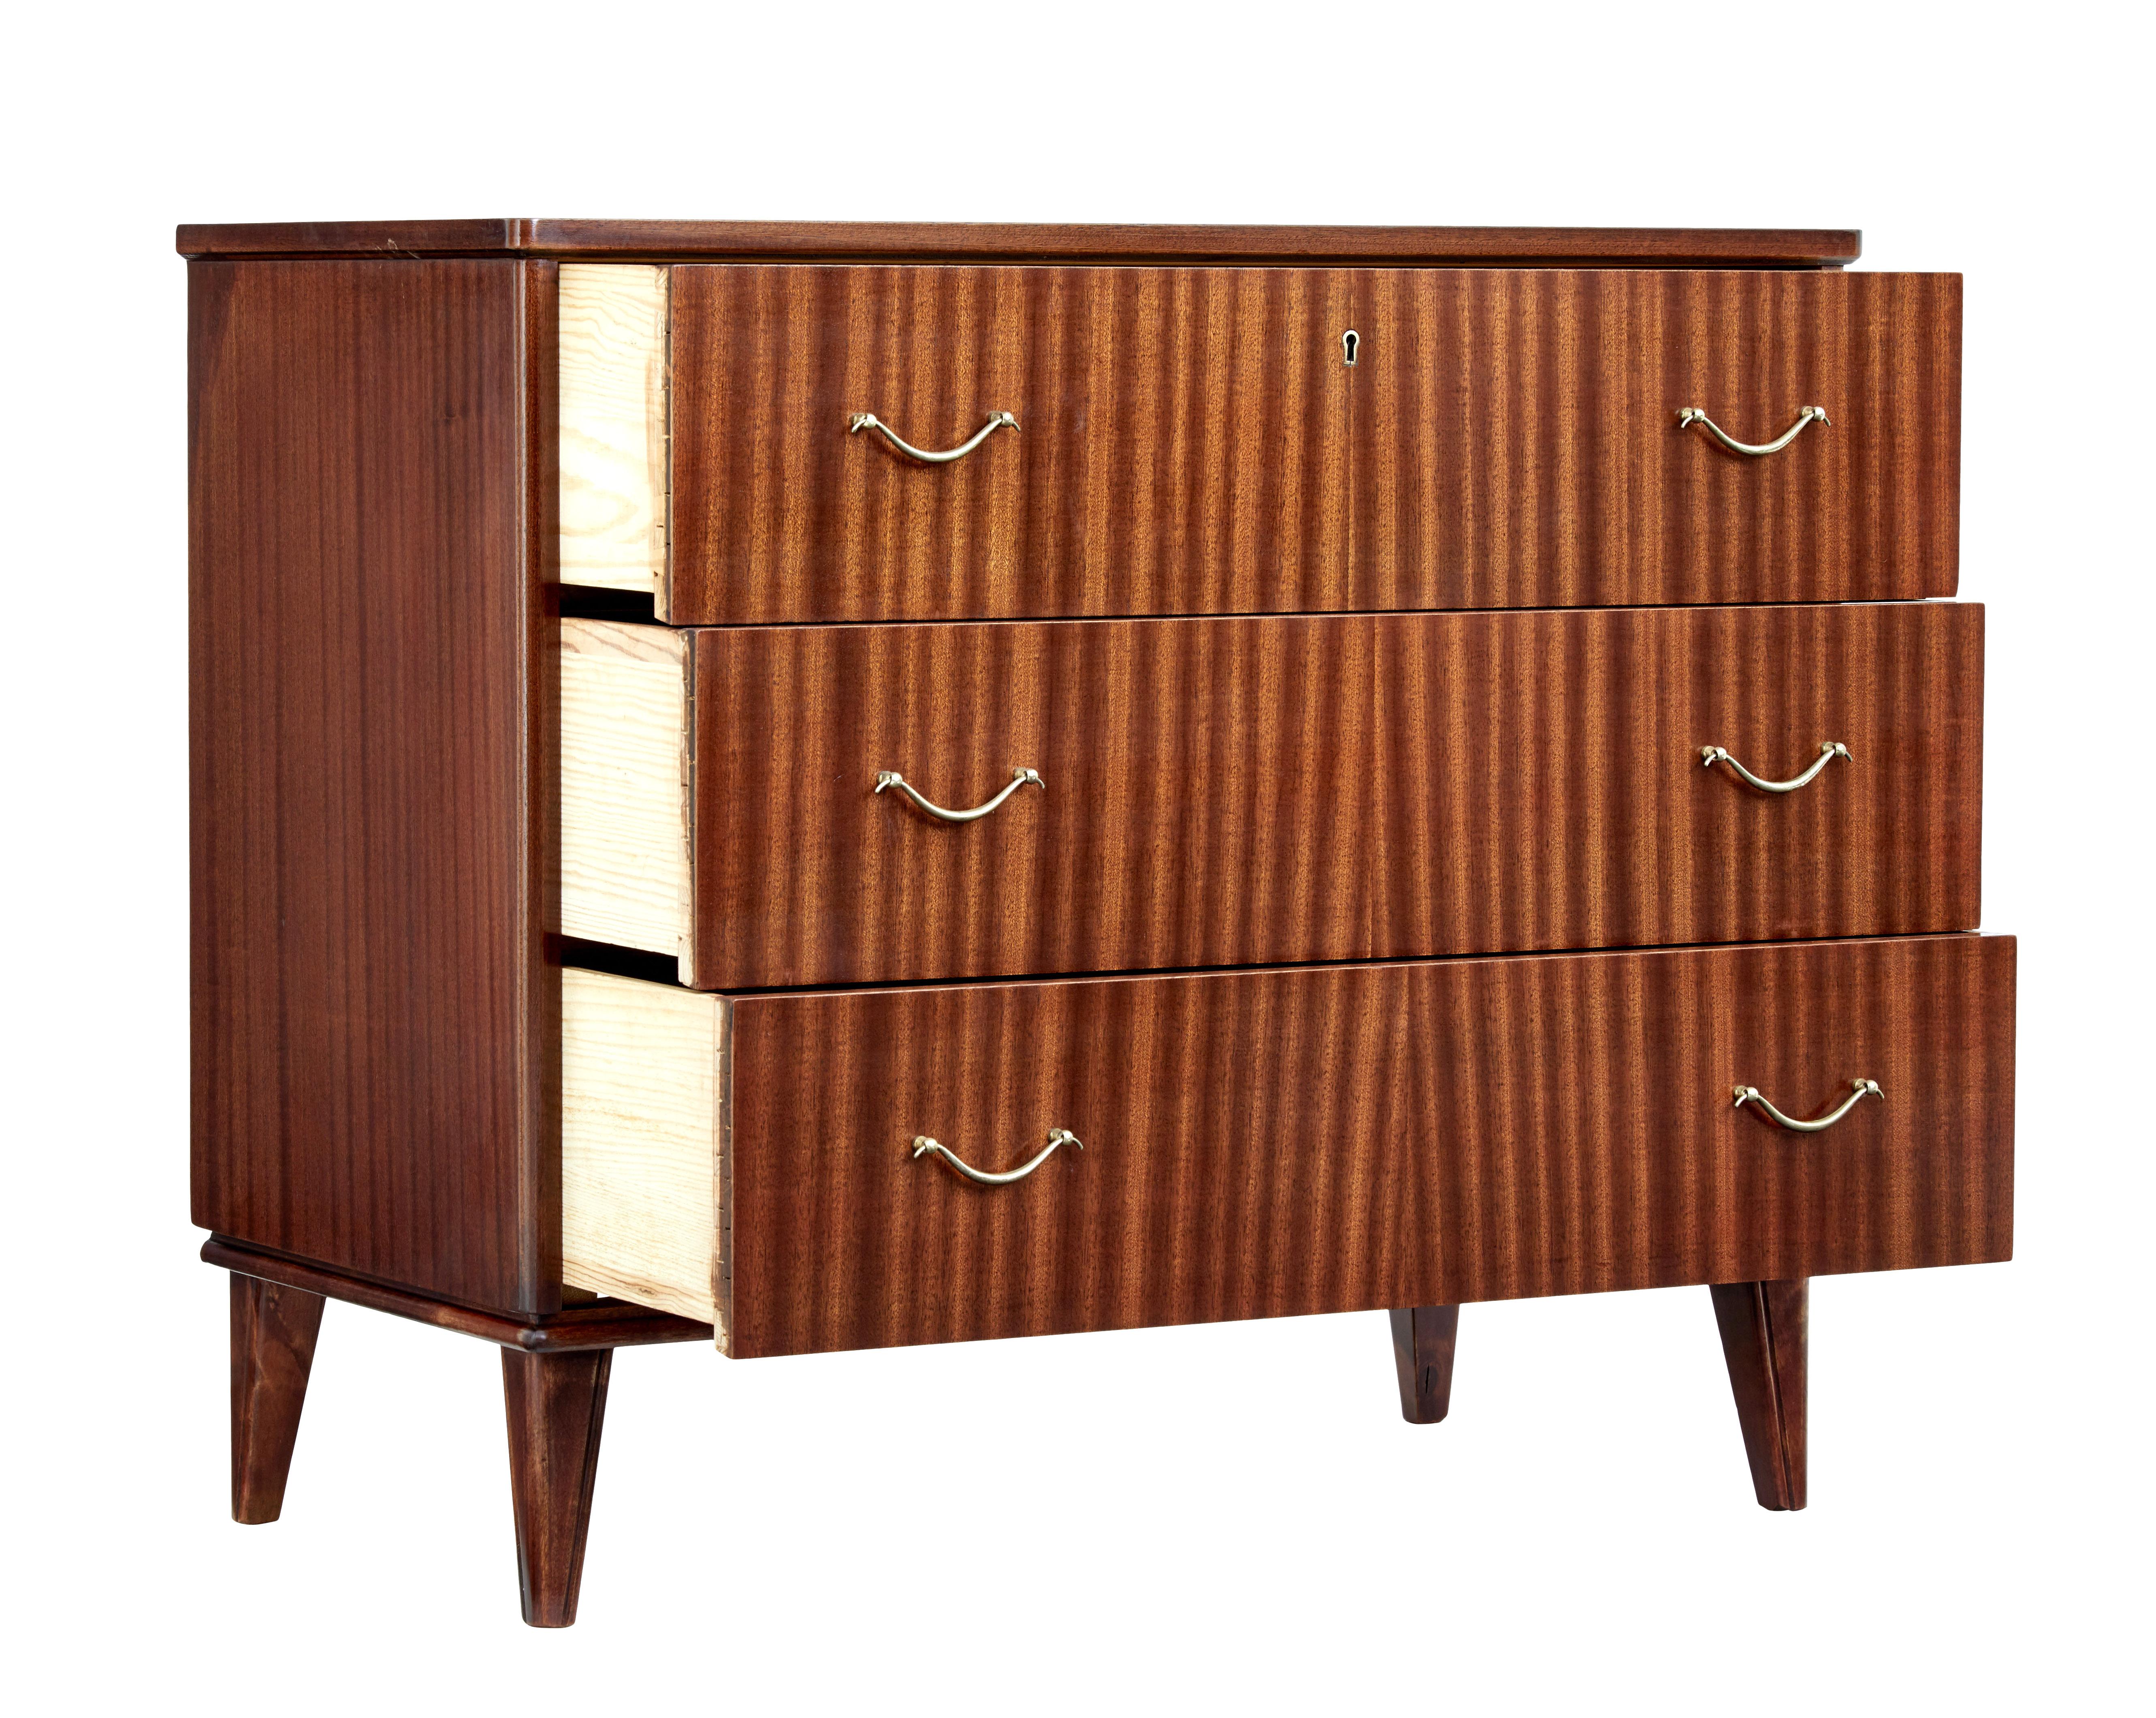 Mid-20th century mahogany Scandinavian chest of drawers, circa 1960.

Good quality piece of Scandinavian design. 3 drawers of equal size fitted with brass handles. Rich golden color. Standing on tapered legs.

Area of restoration to veneer loss